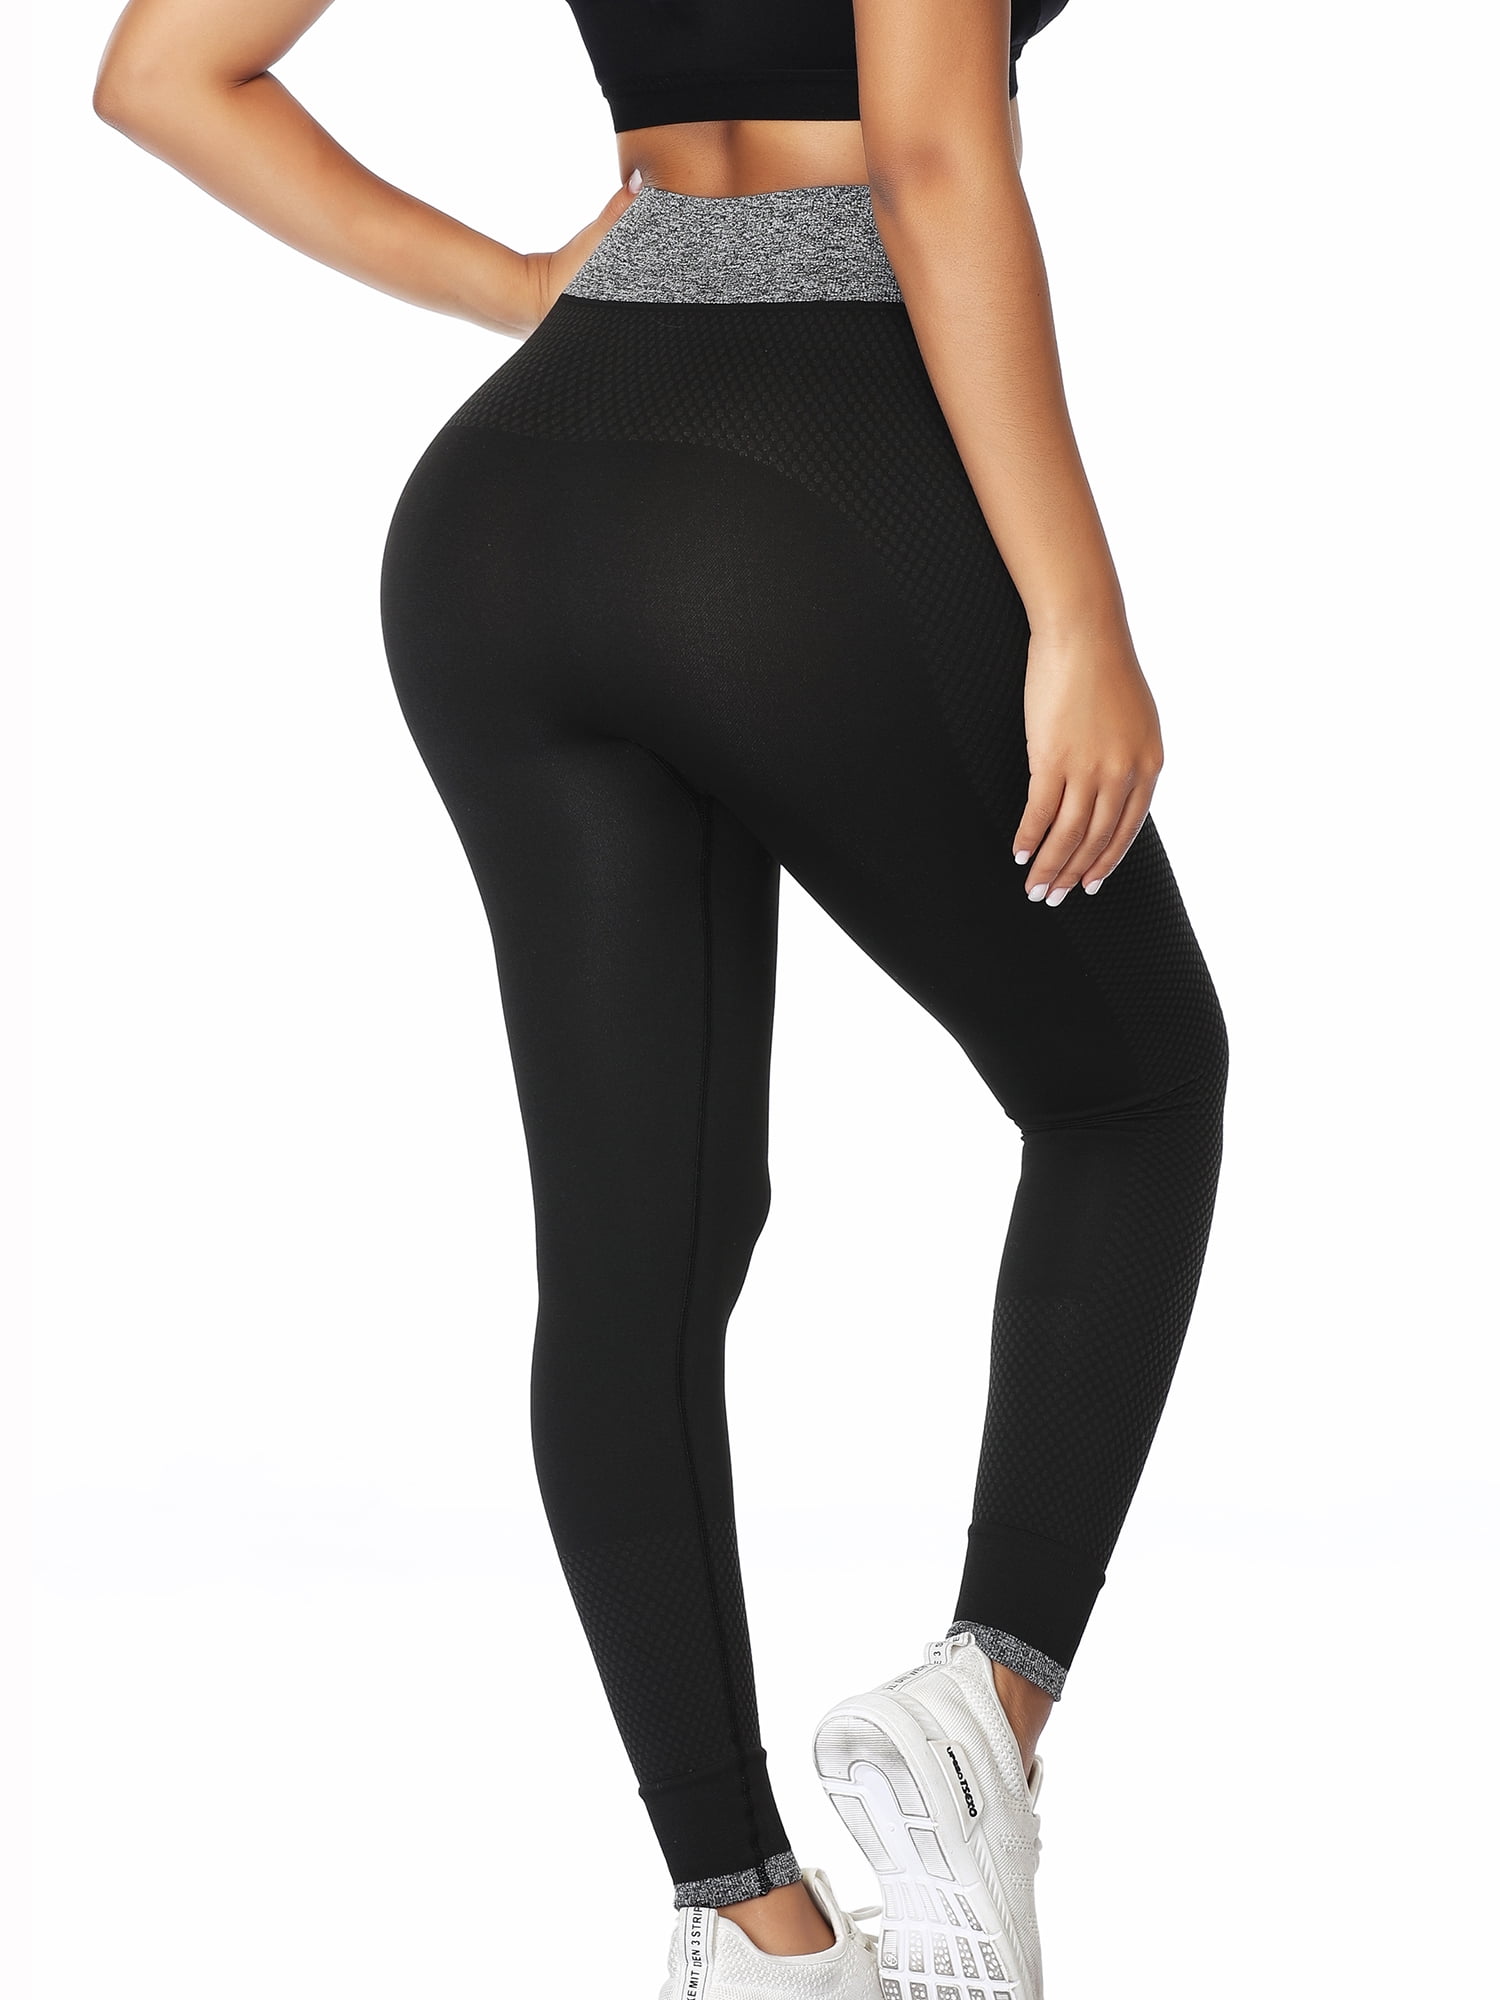 What Are Seamless Leggings